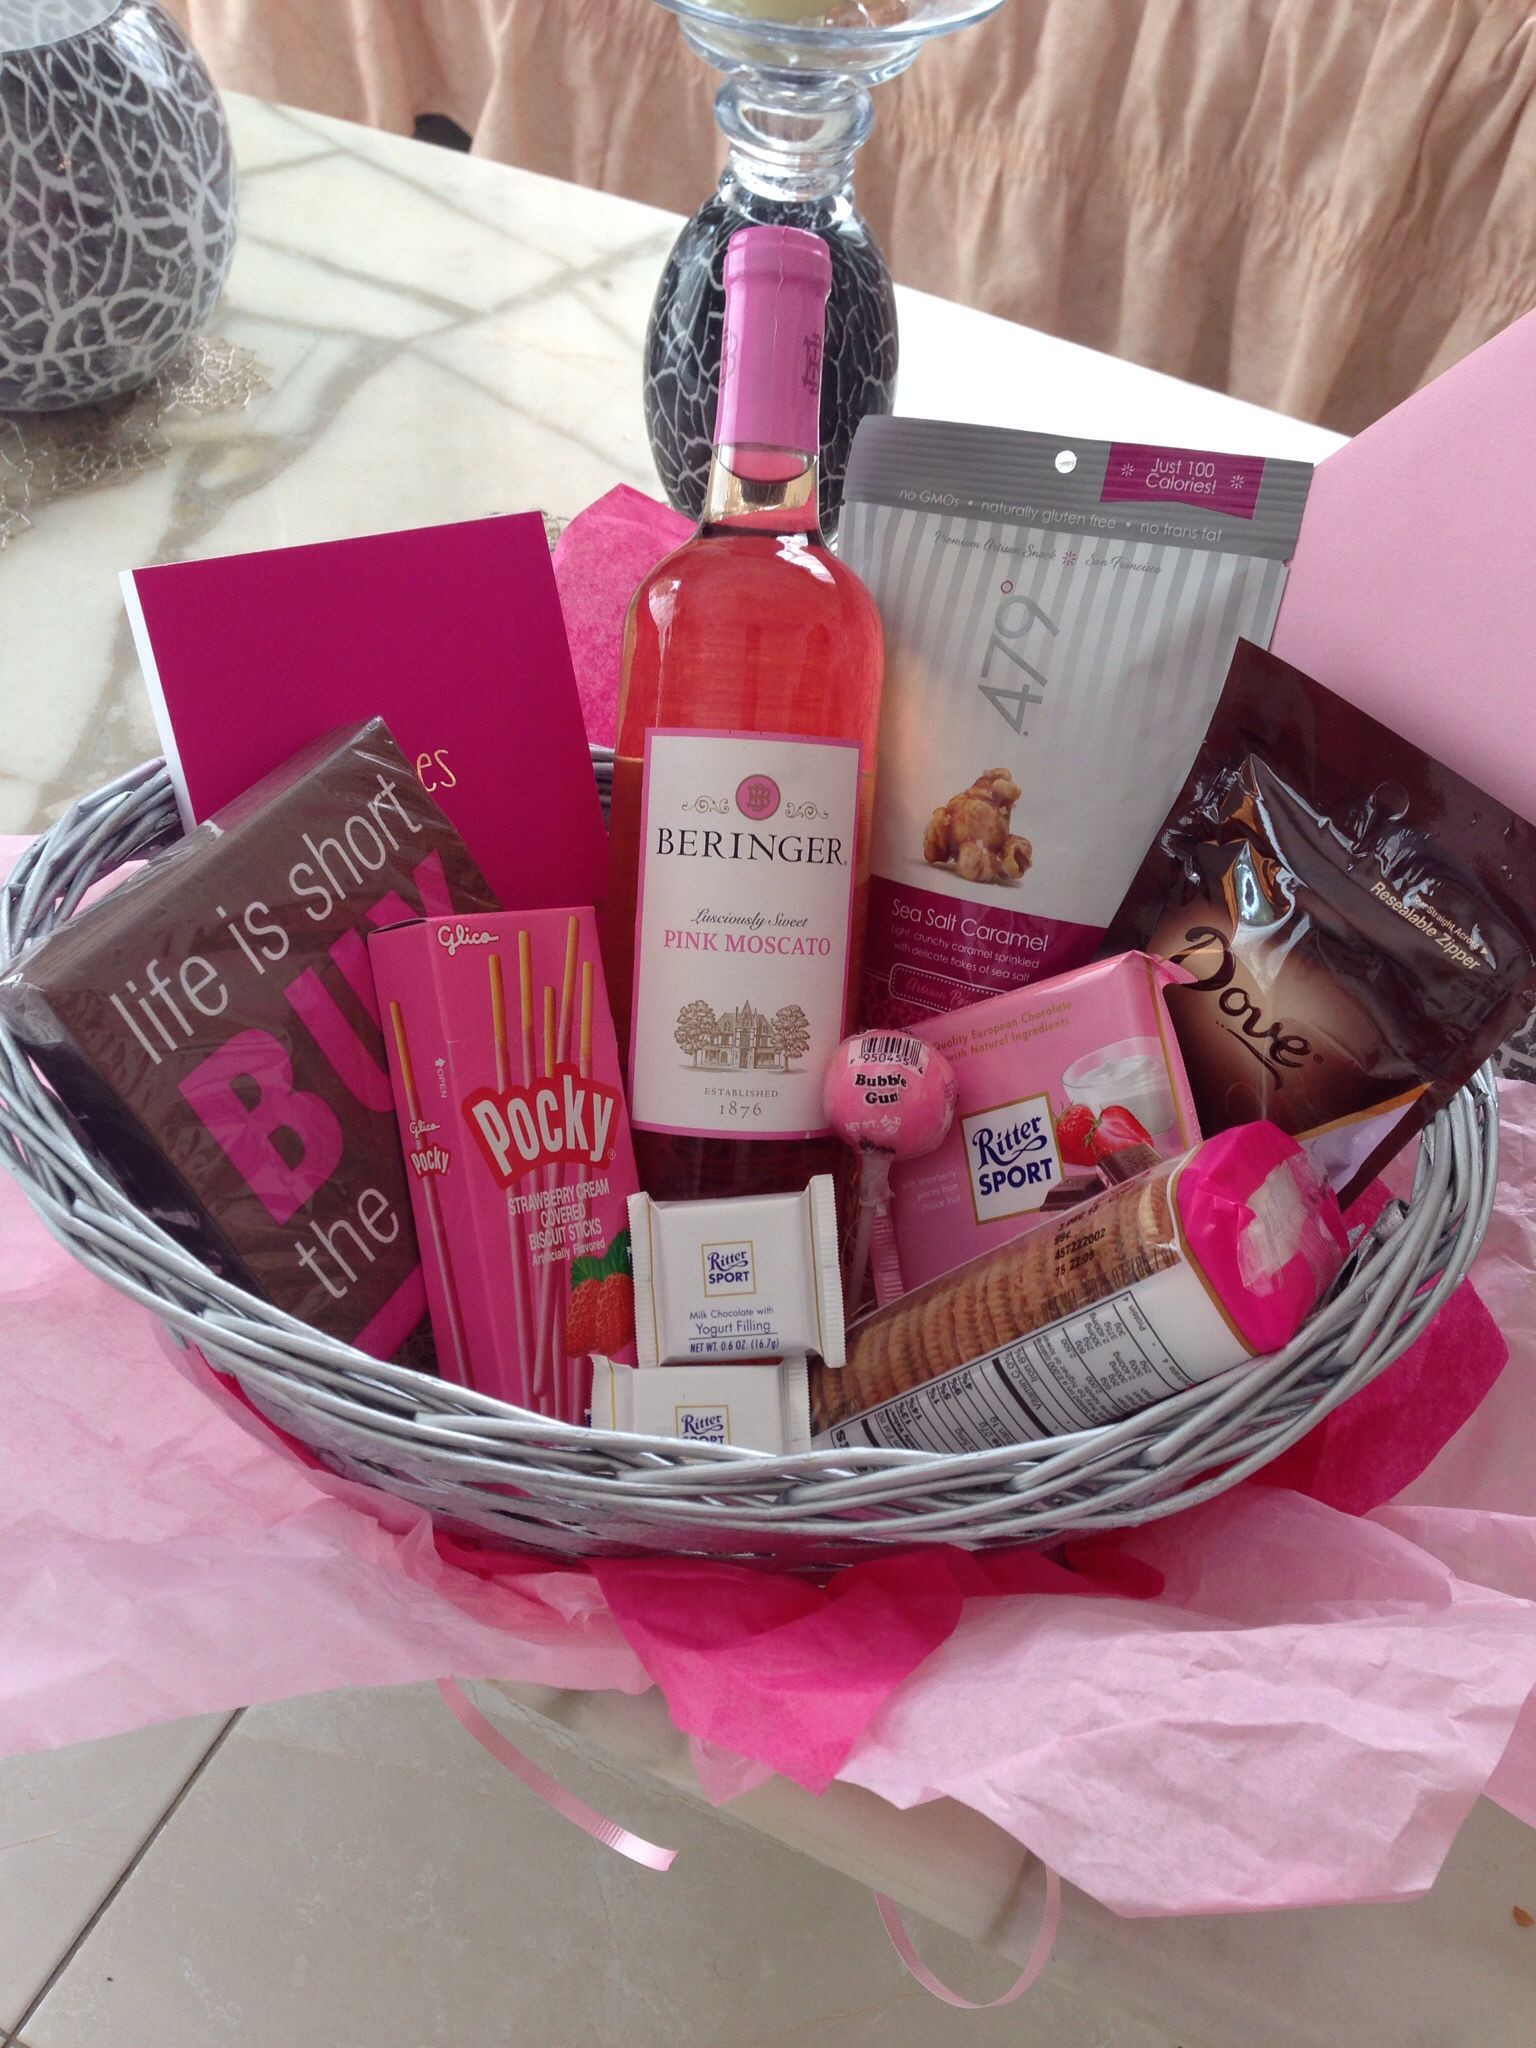 Gift Basket Ideas For Friends
 The best friend basket with pink moscato